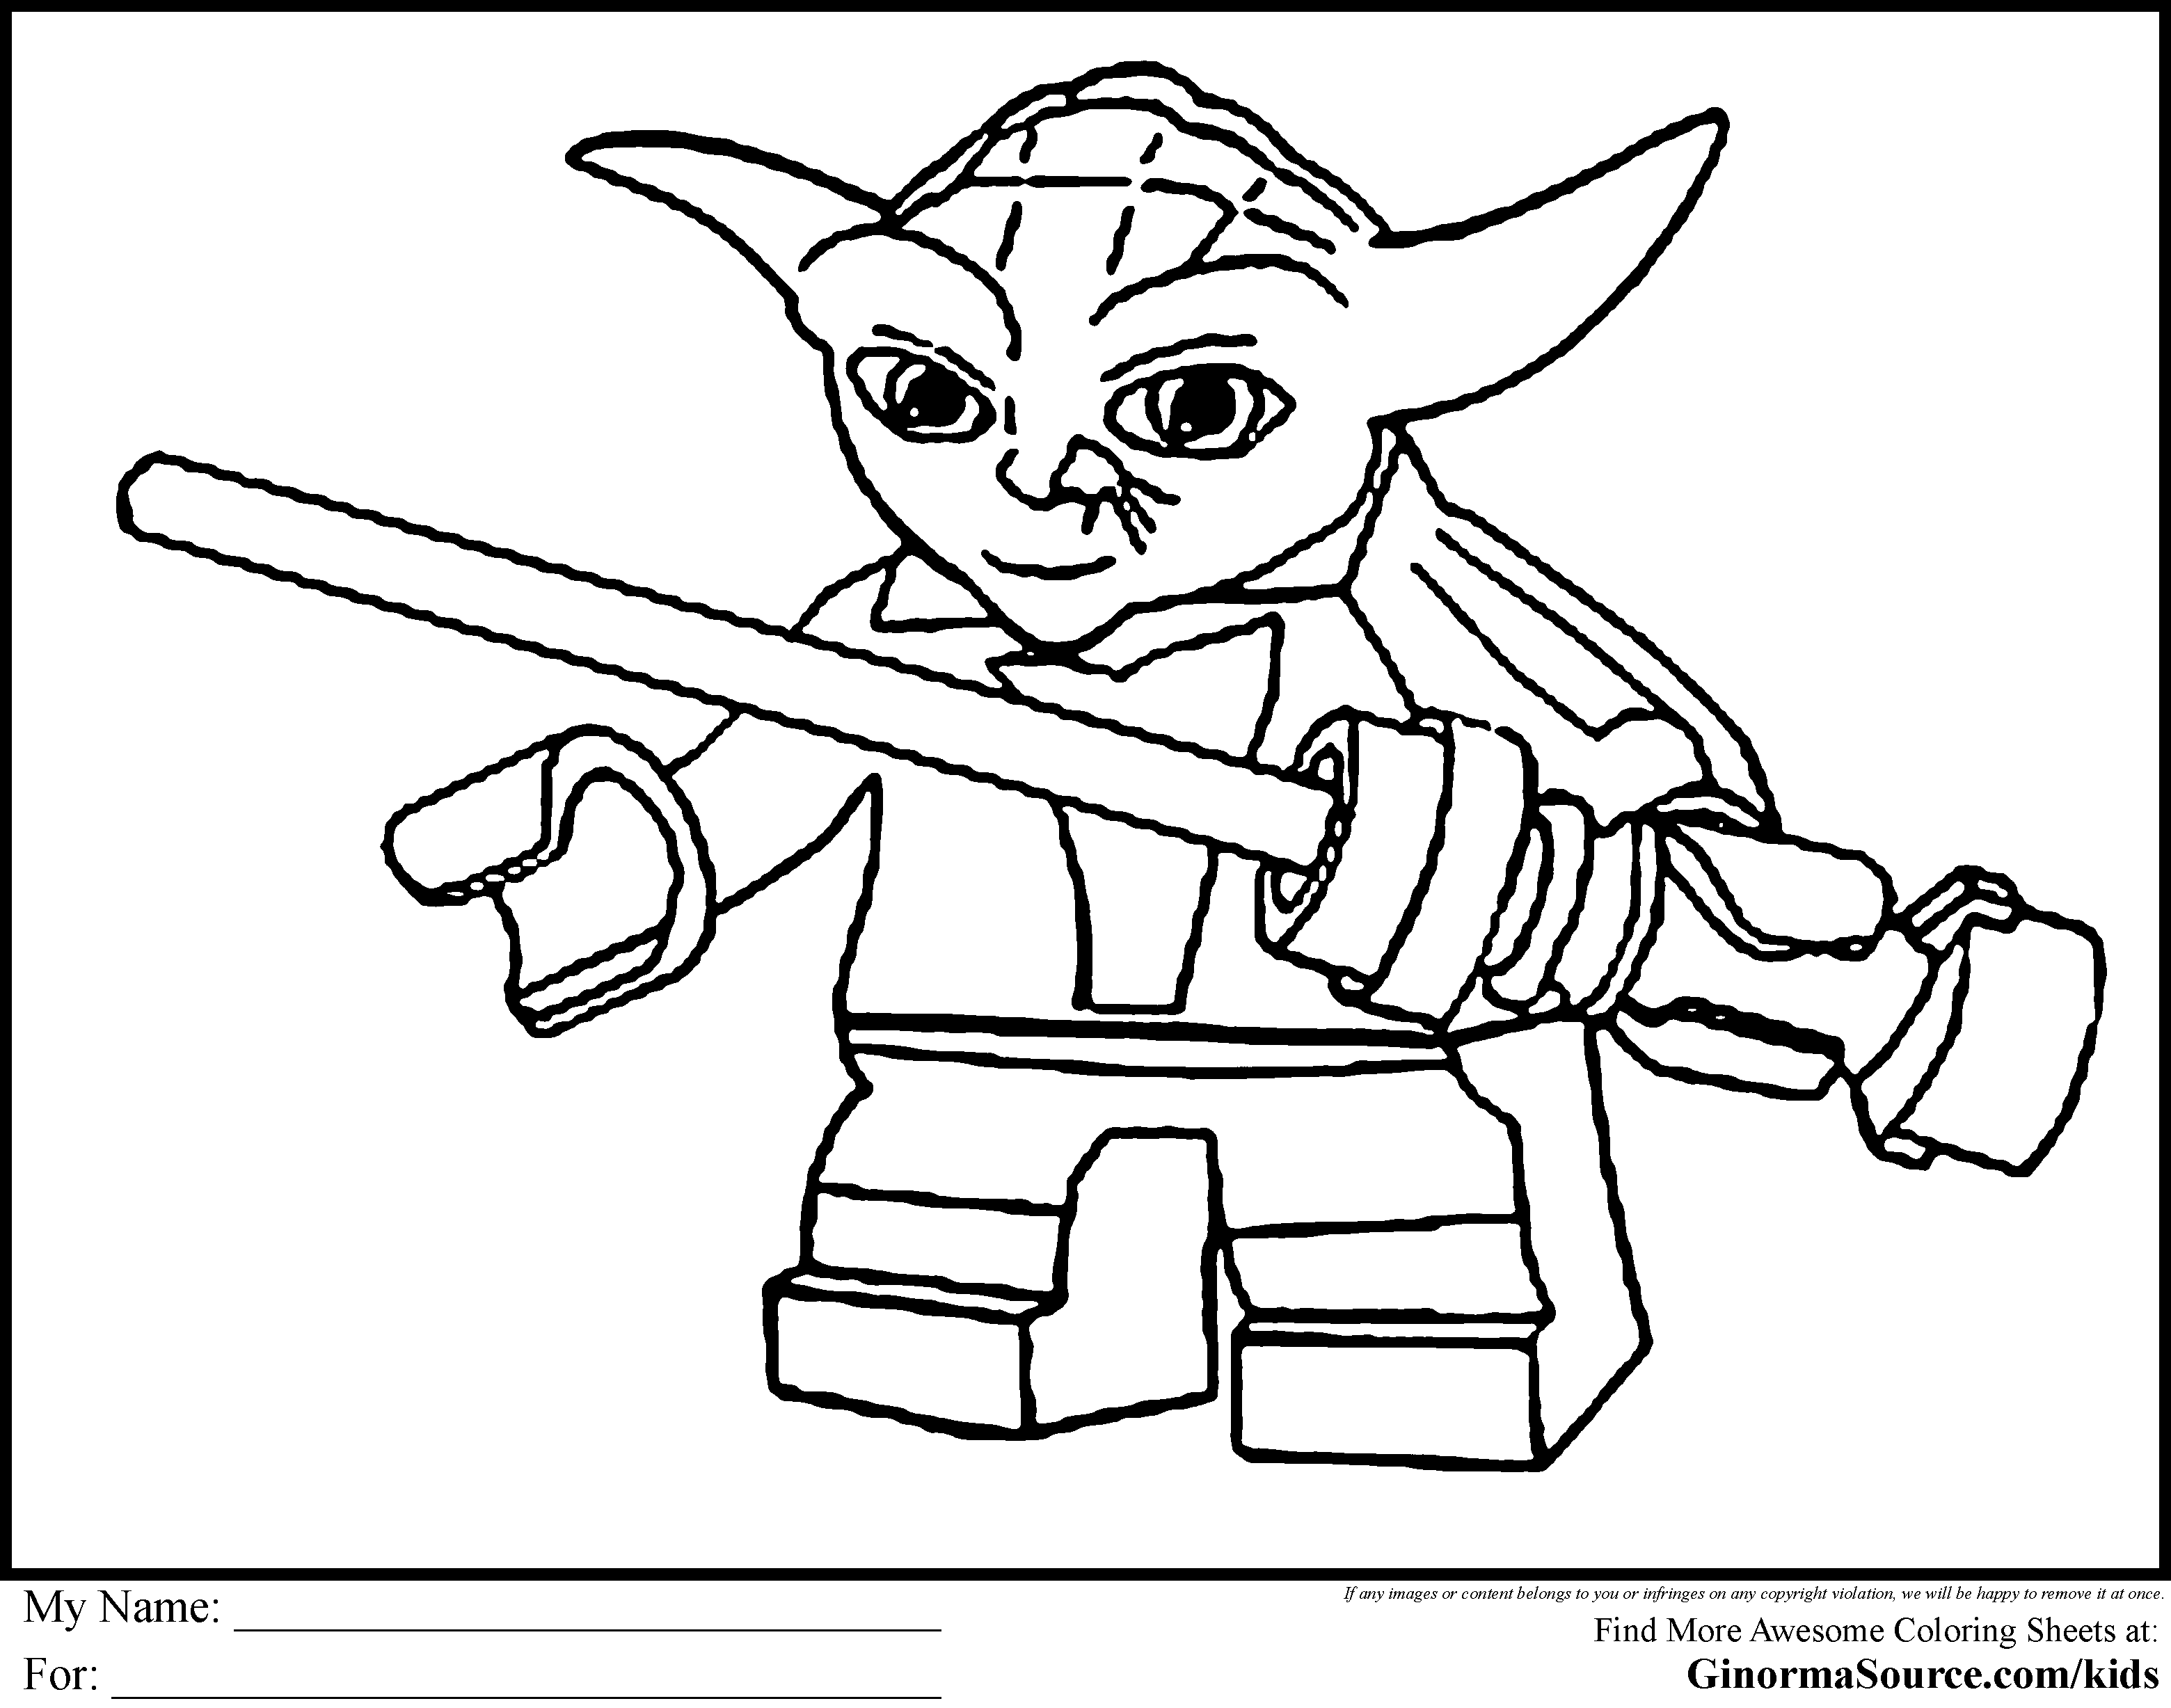 Free Star Wars Lego Free Coloring Pages, Download Free Star Wars Lego